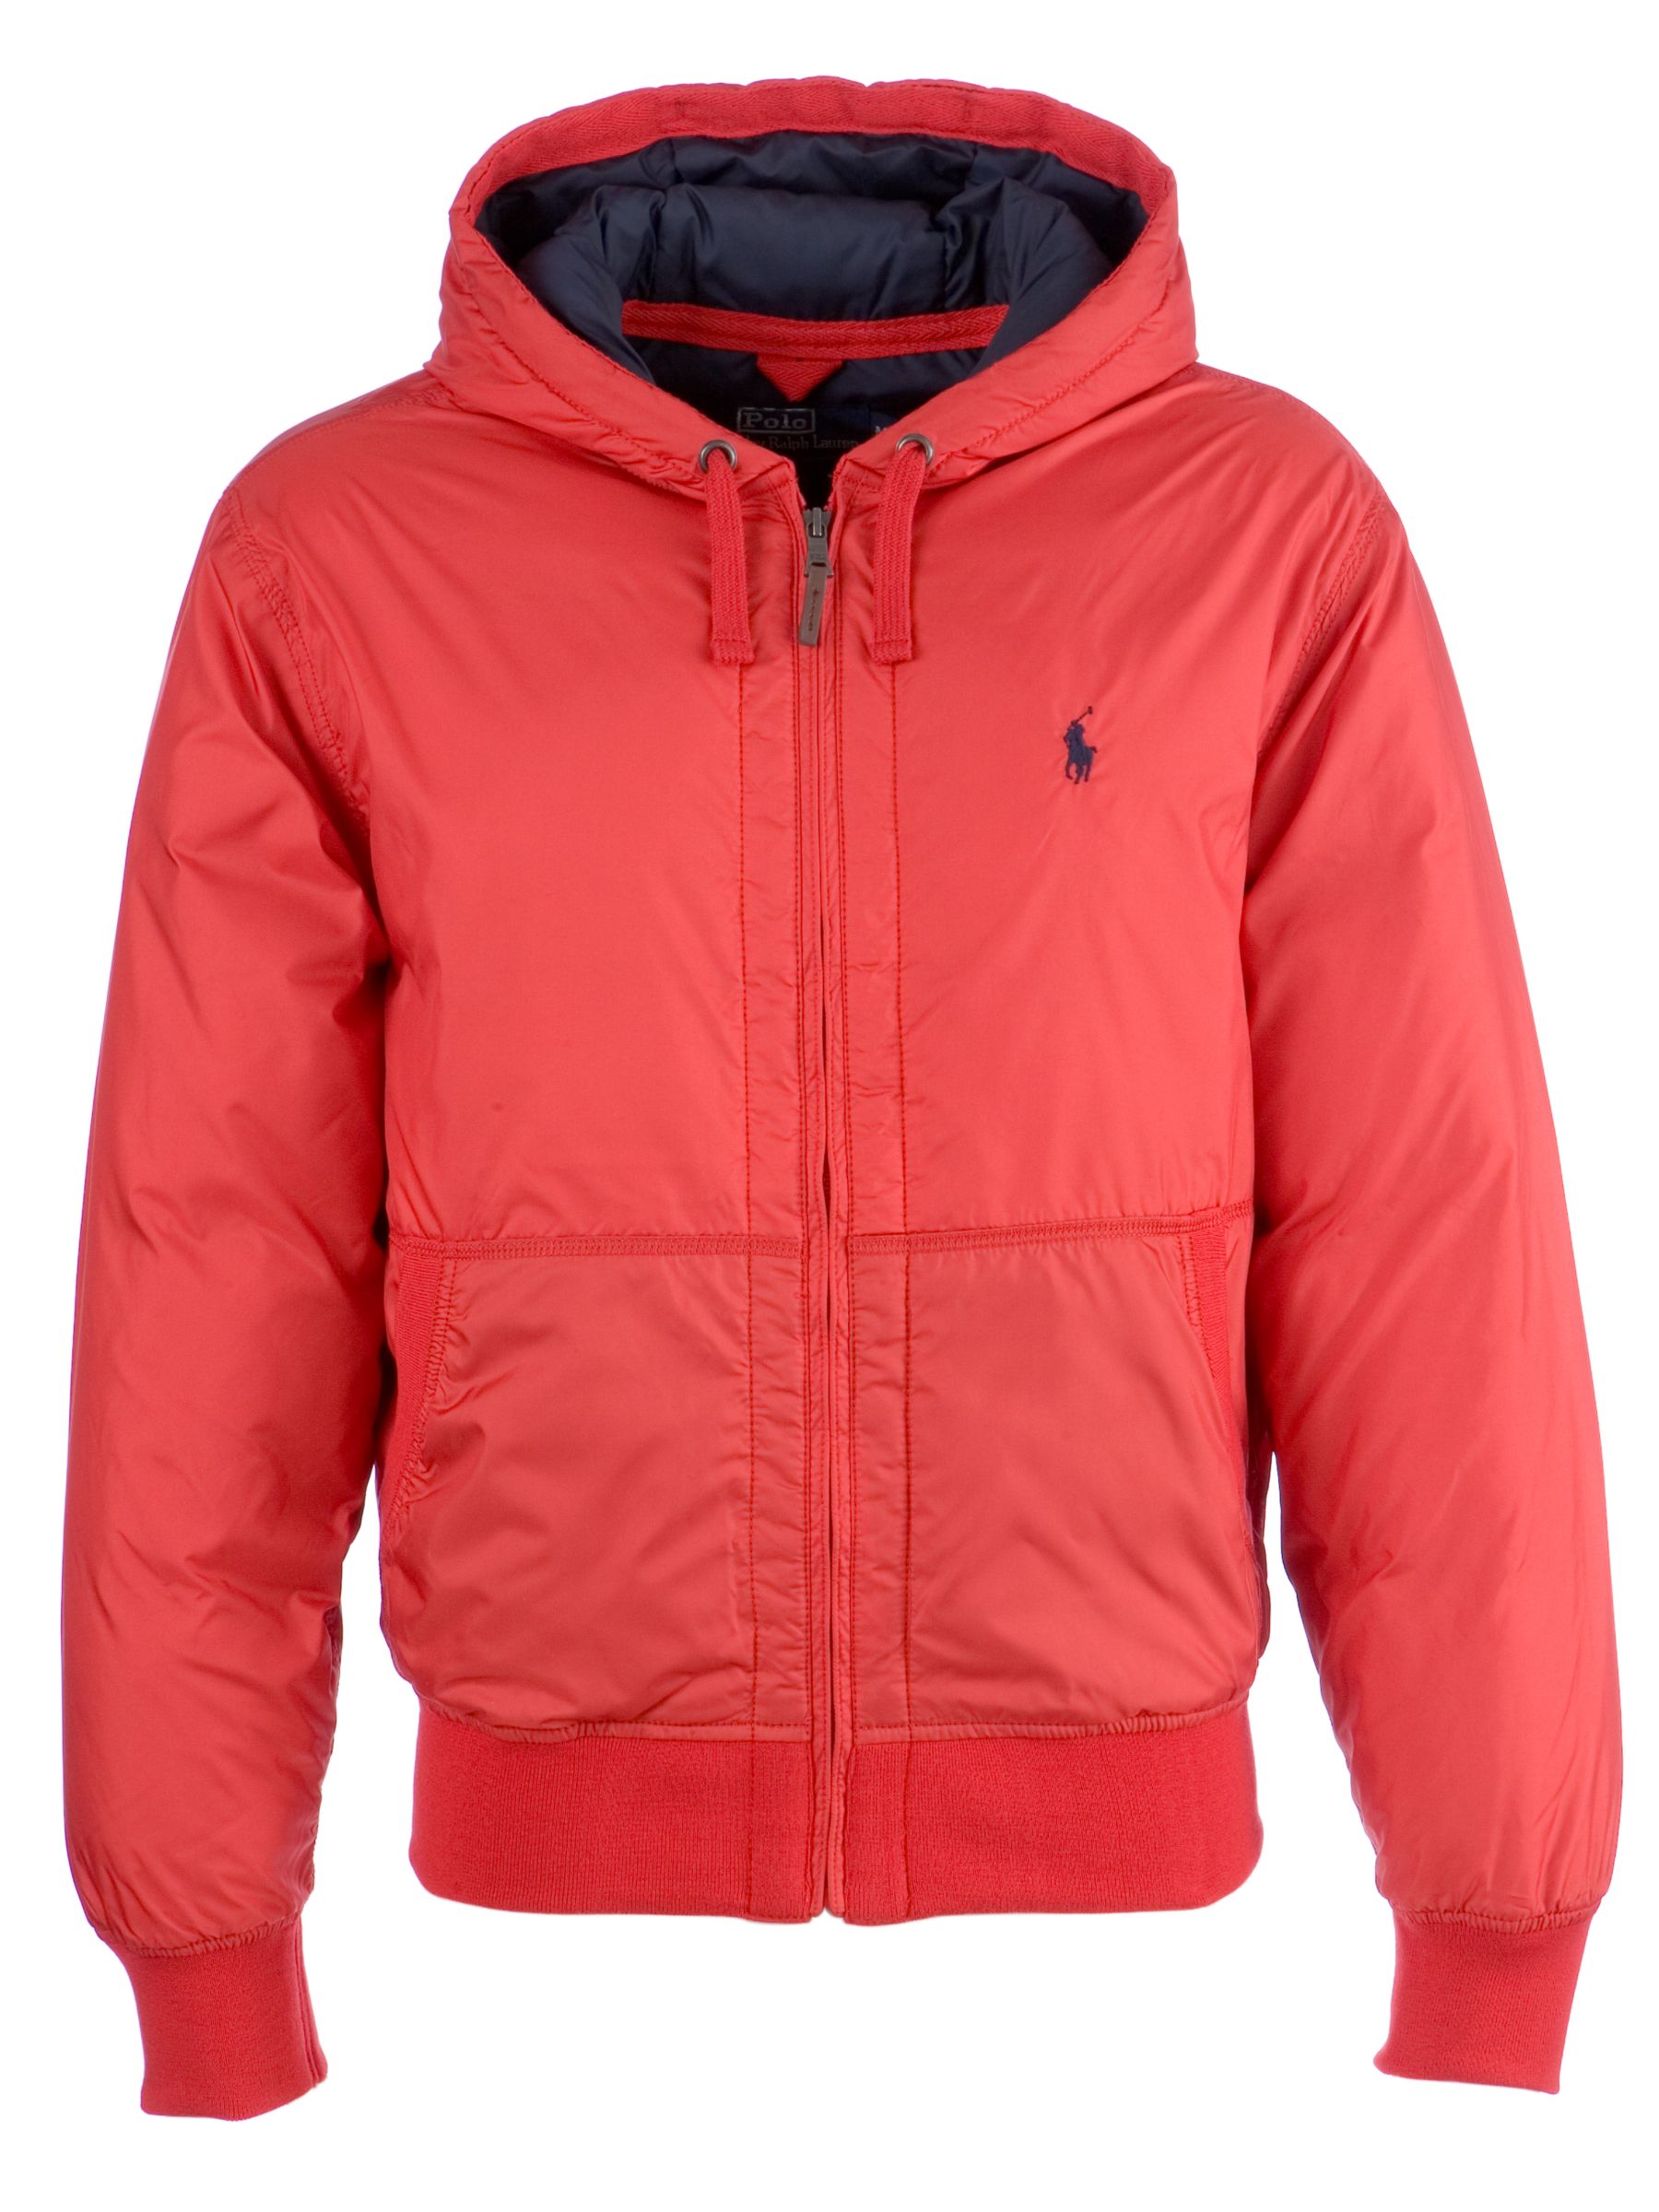 Polo Ralph Lauren Hooded Track Jacket, Red at John Lewis